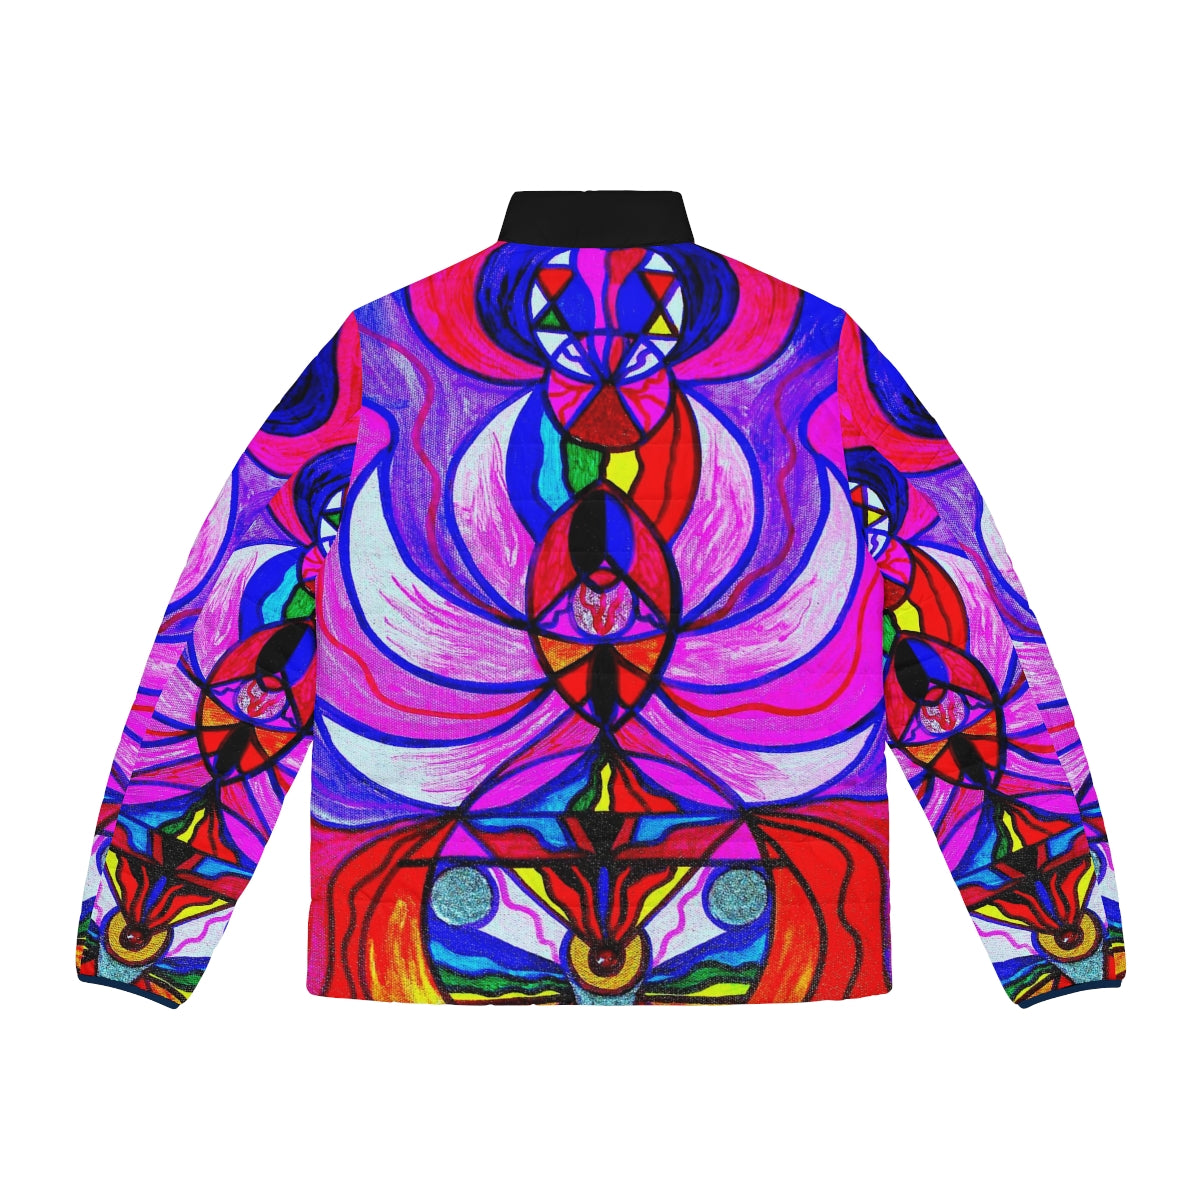 we-offer-the-best-prices-on-the-best-of-divine-feminine-activation-unisex-puffer-jacket-aop-online-now_2.jpg